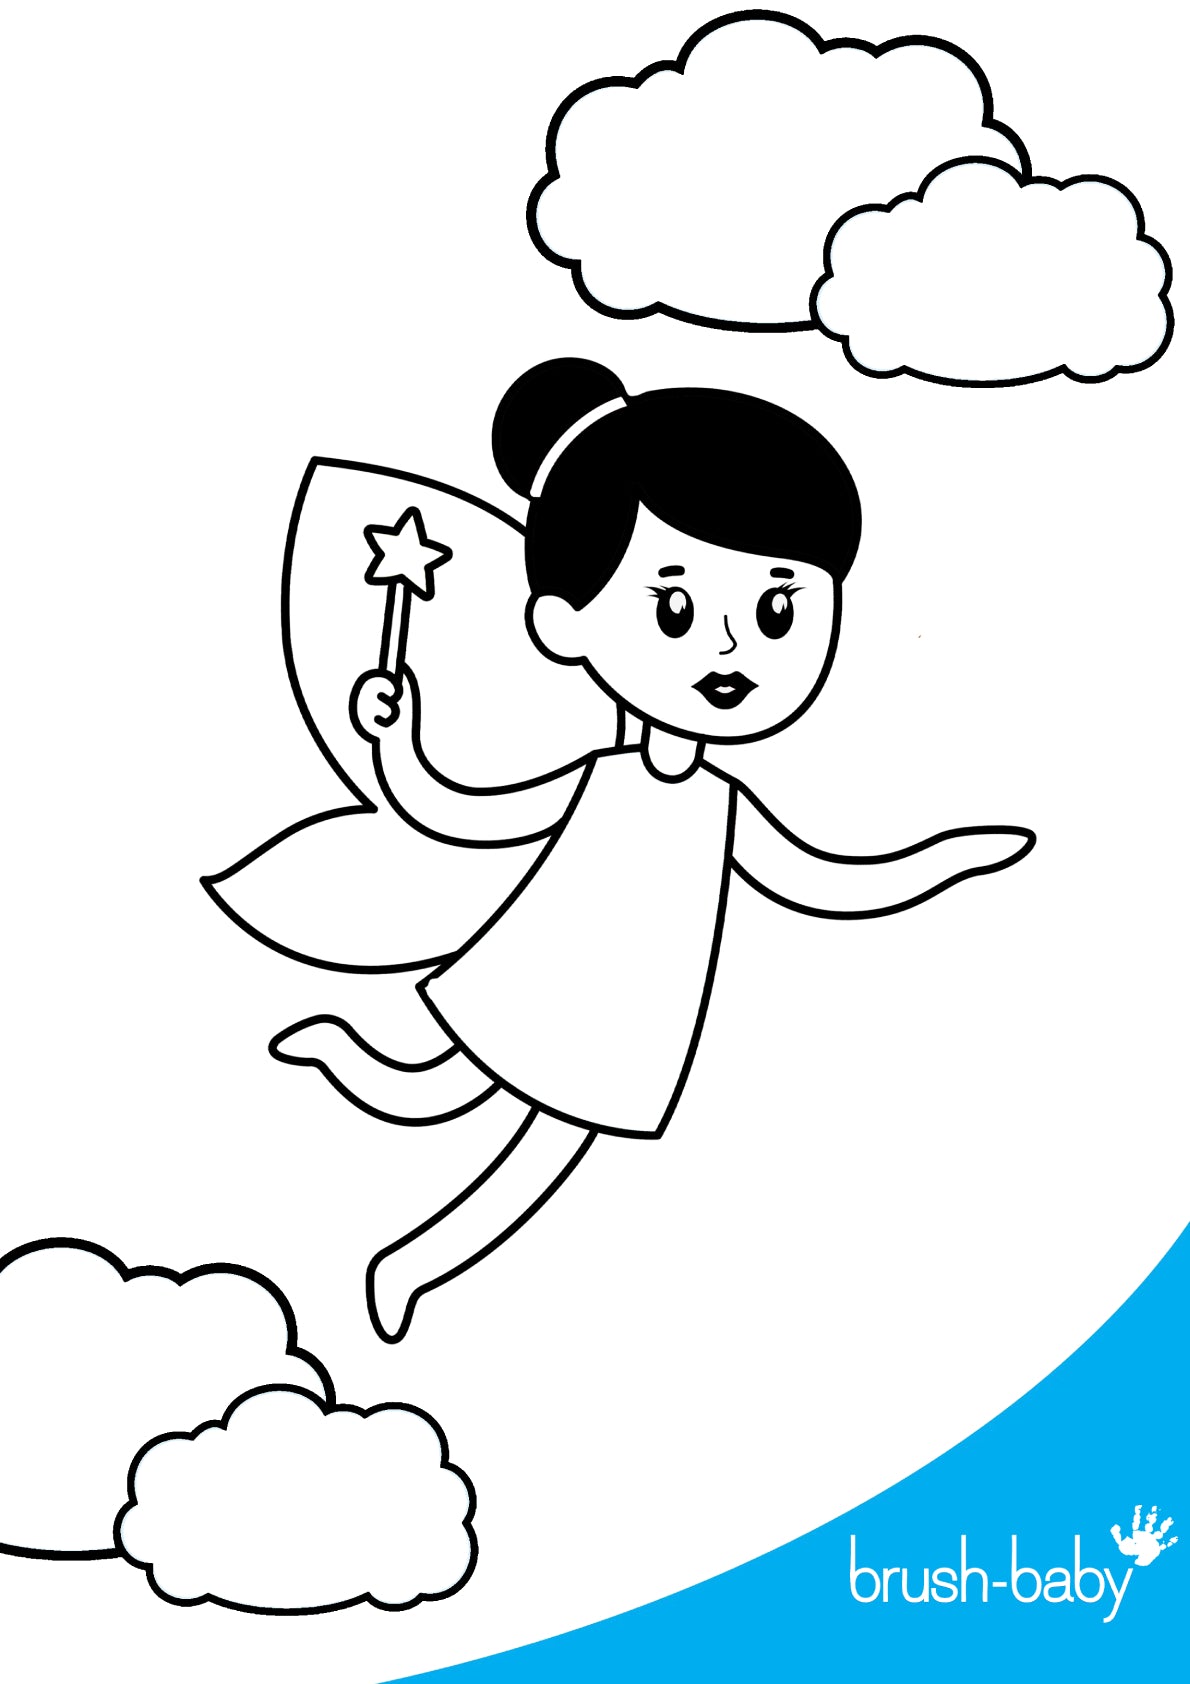 Toothfairy Kids Toothbrush and Milk Teeth Toothpaste Colouring Sheet